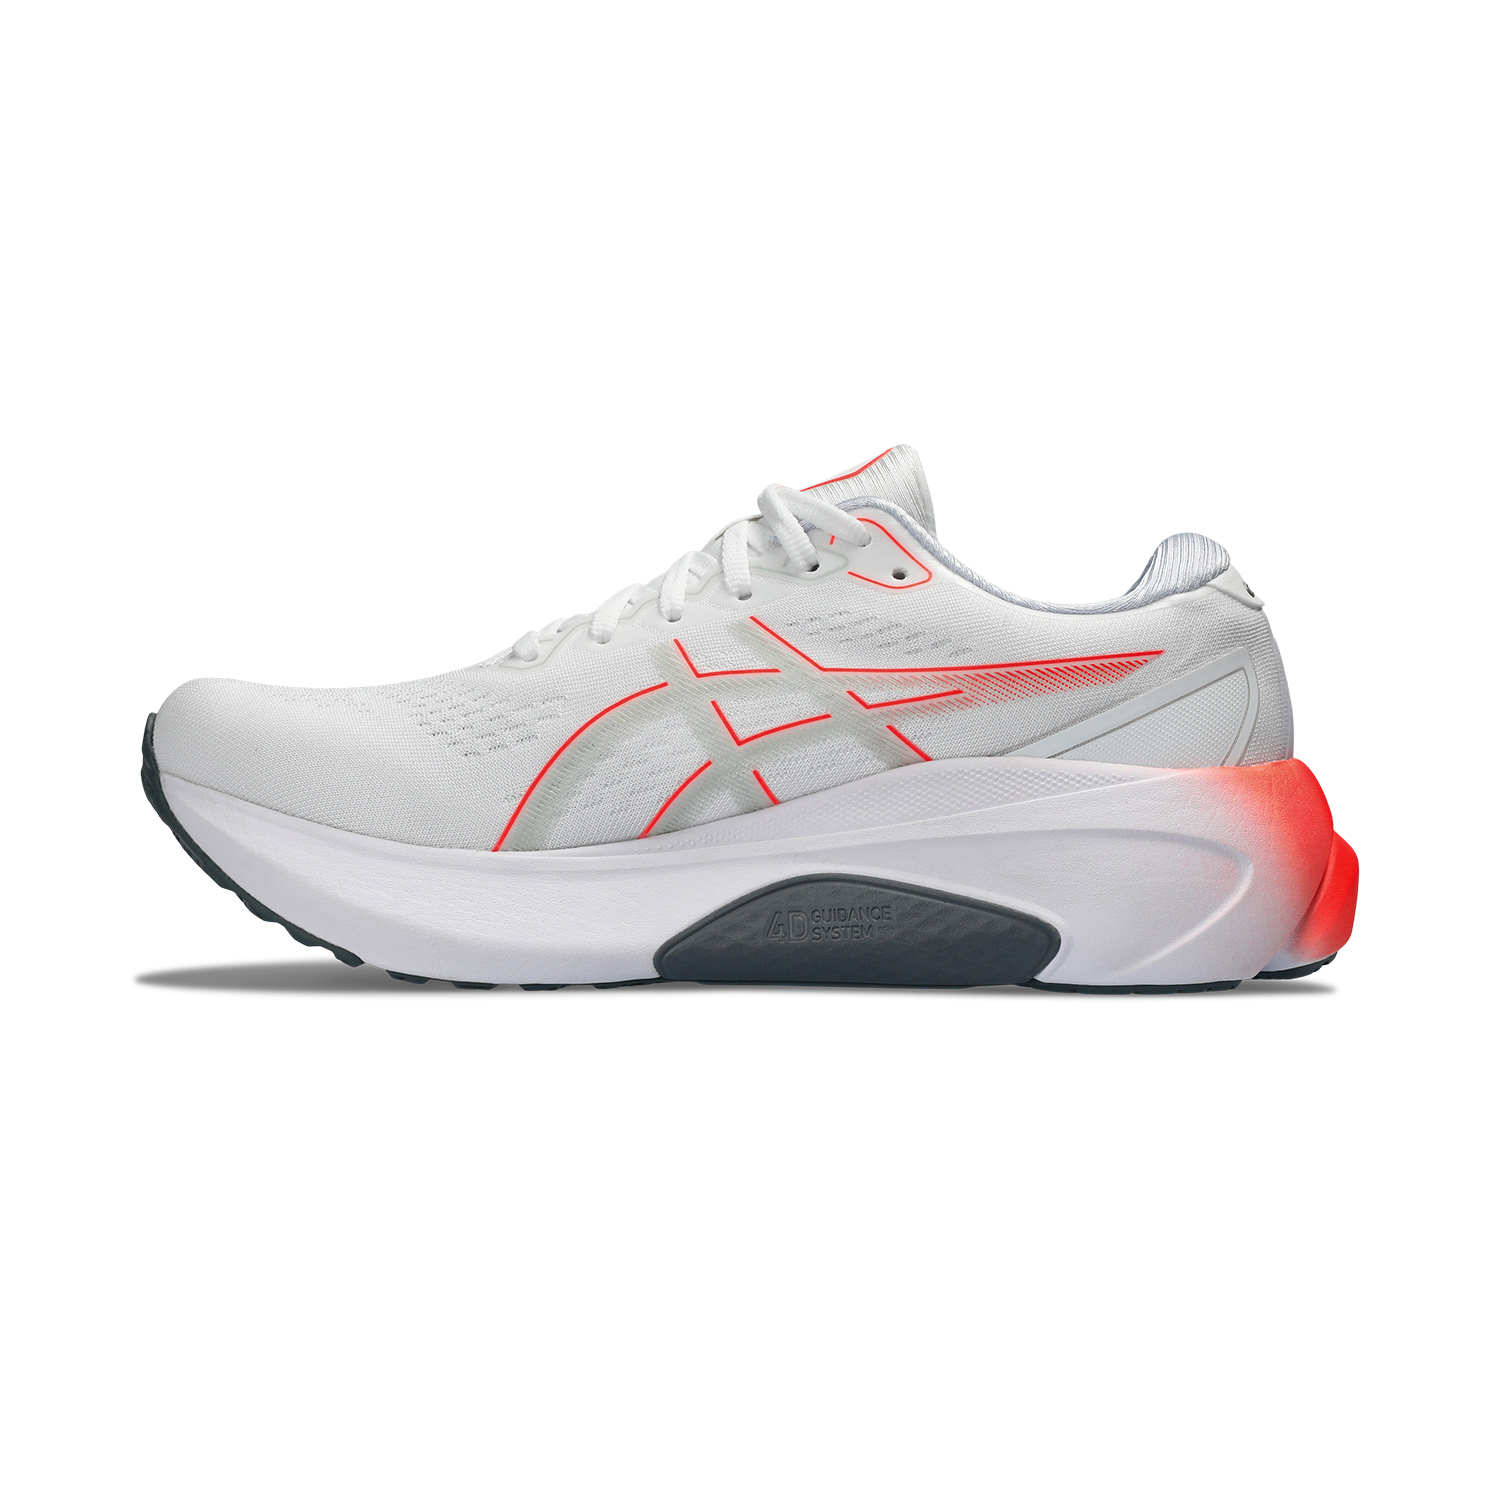 Men's GEL-CONTEND 7 | White/Classic Red | Running Shoes | ASICS